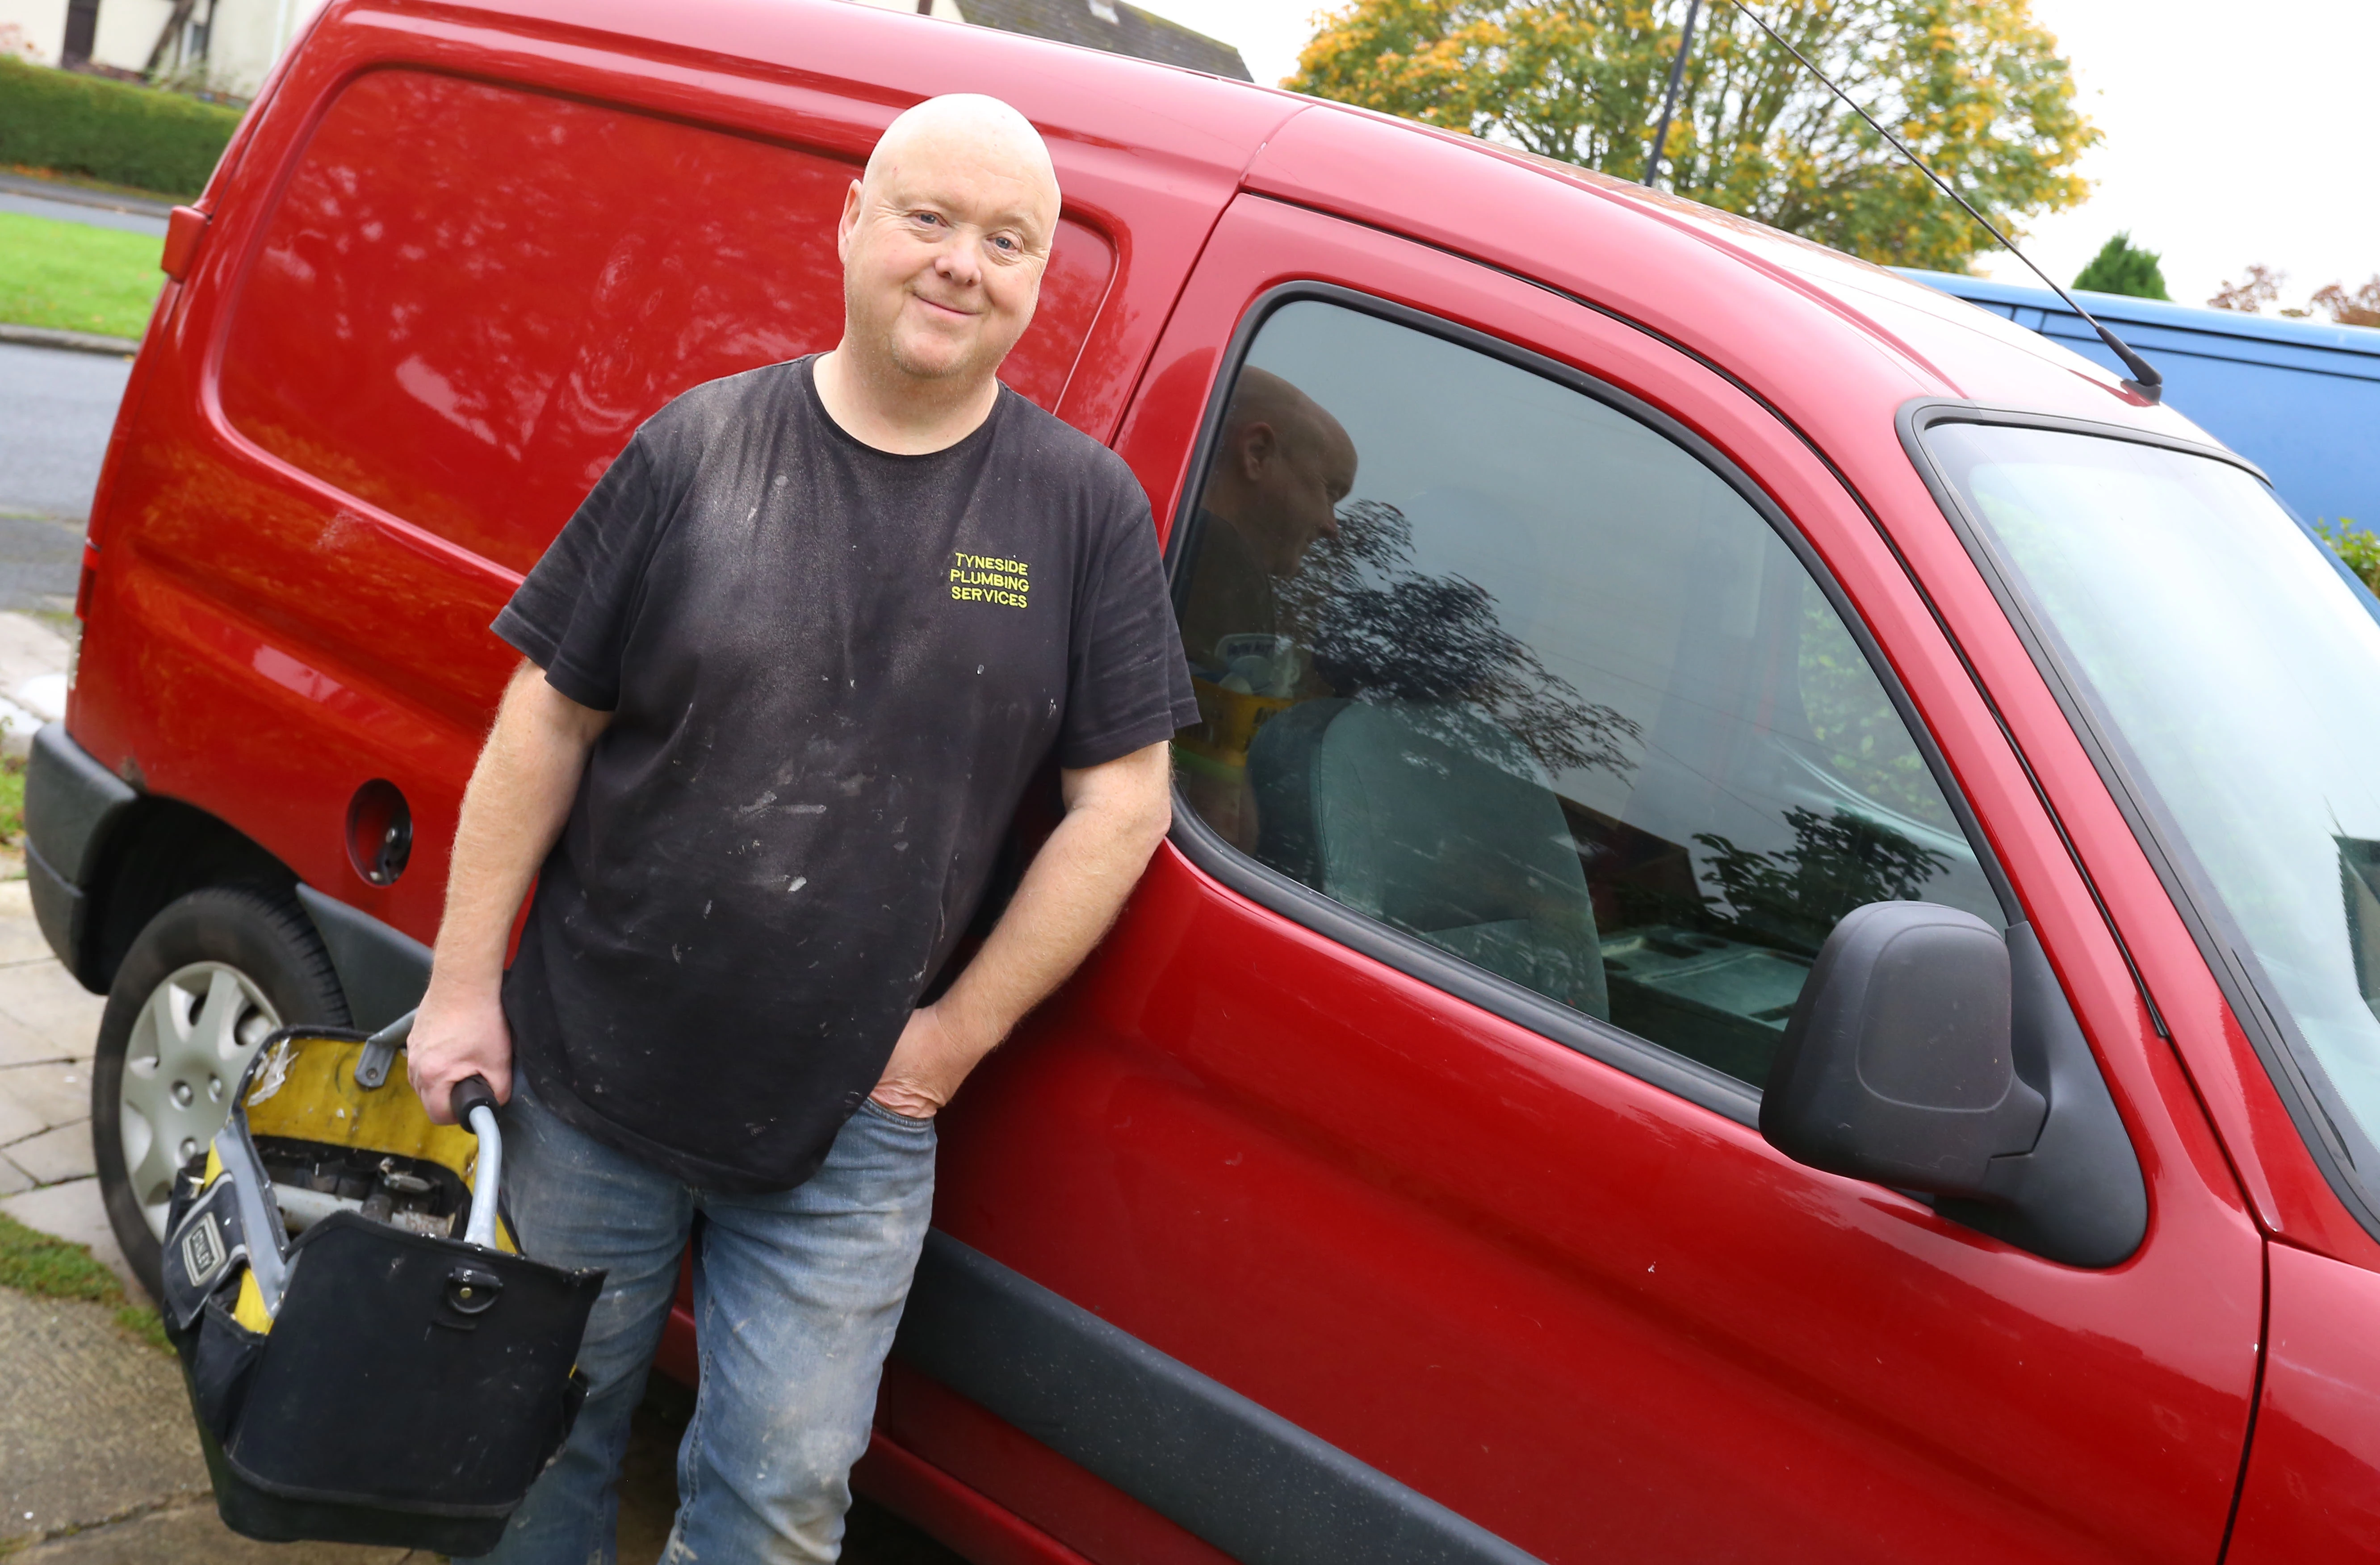 Dave White has seen significant growth for his business Tyneside Plumbing Services after completing free Go Grow training